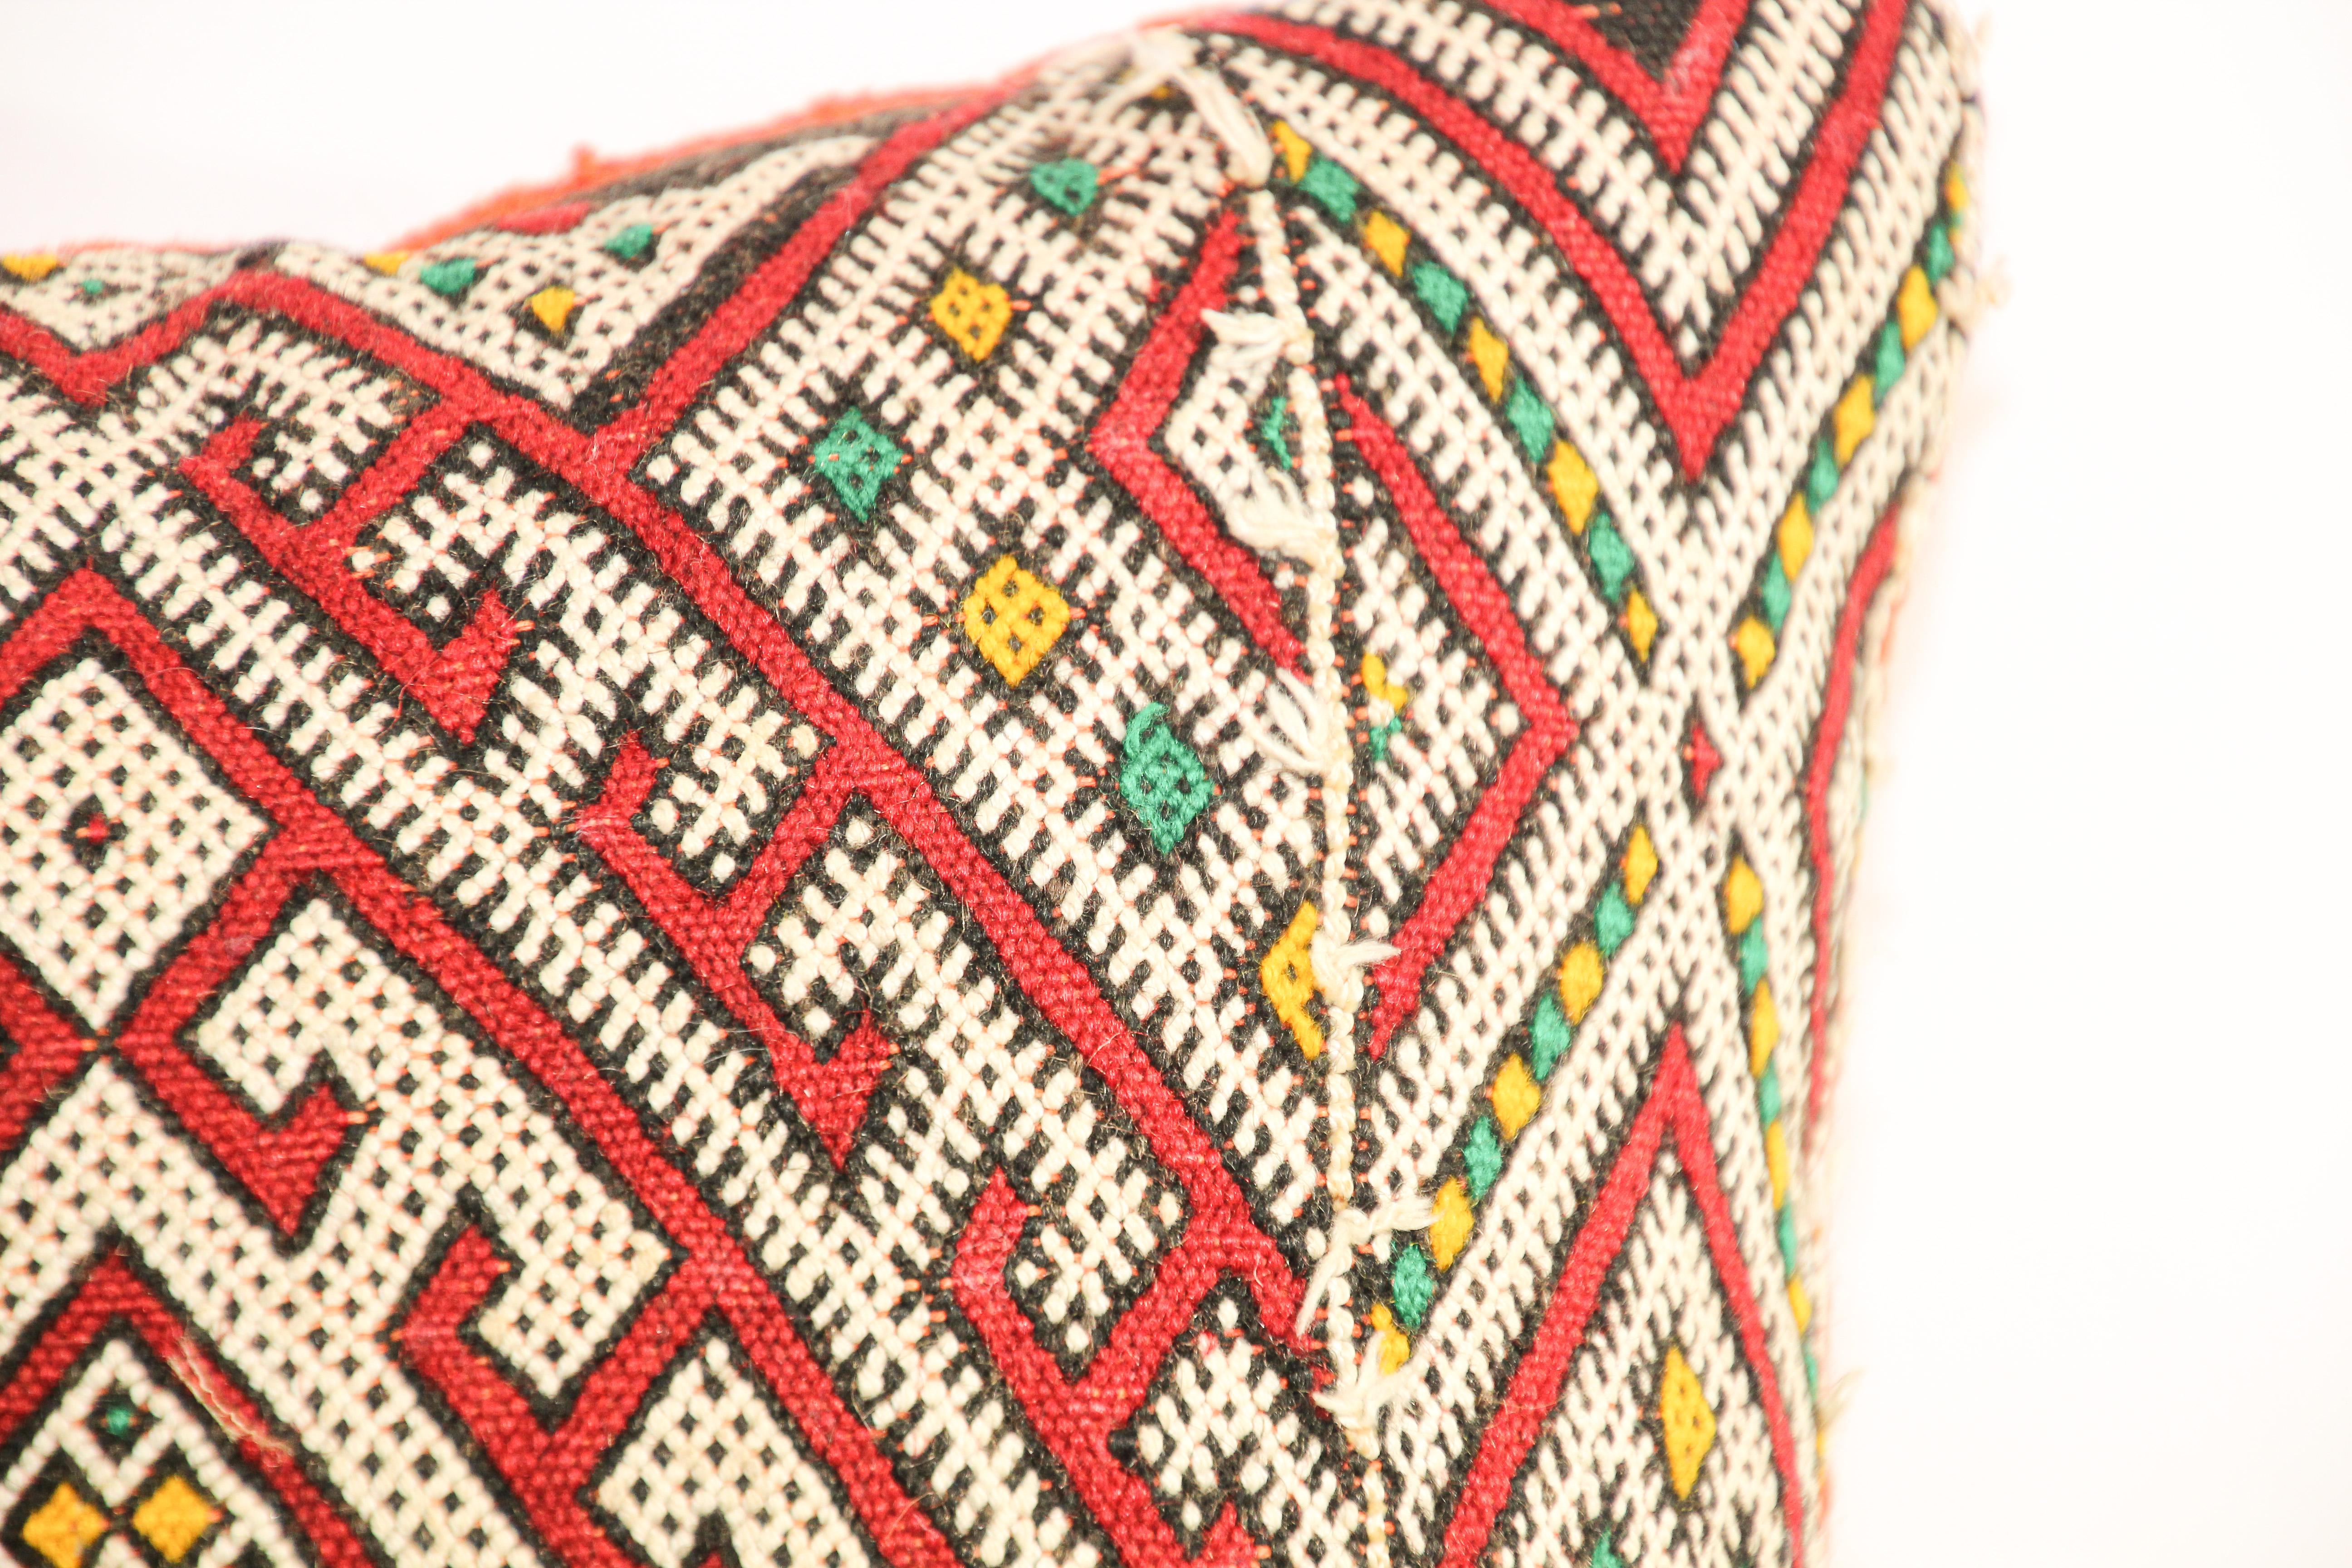 Hand-Woven Moroccan Ethnic Berber Handwoven Pillow For Sale